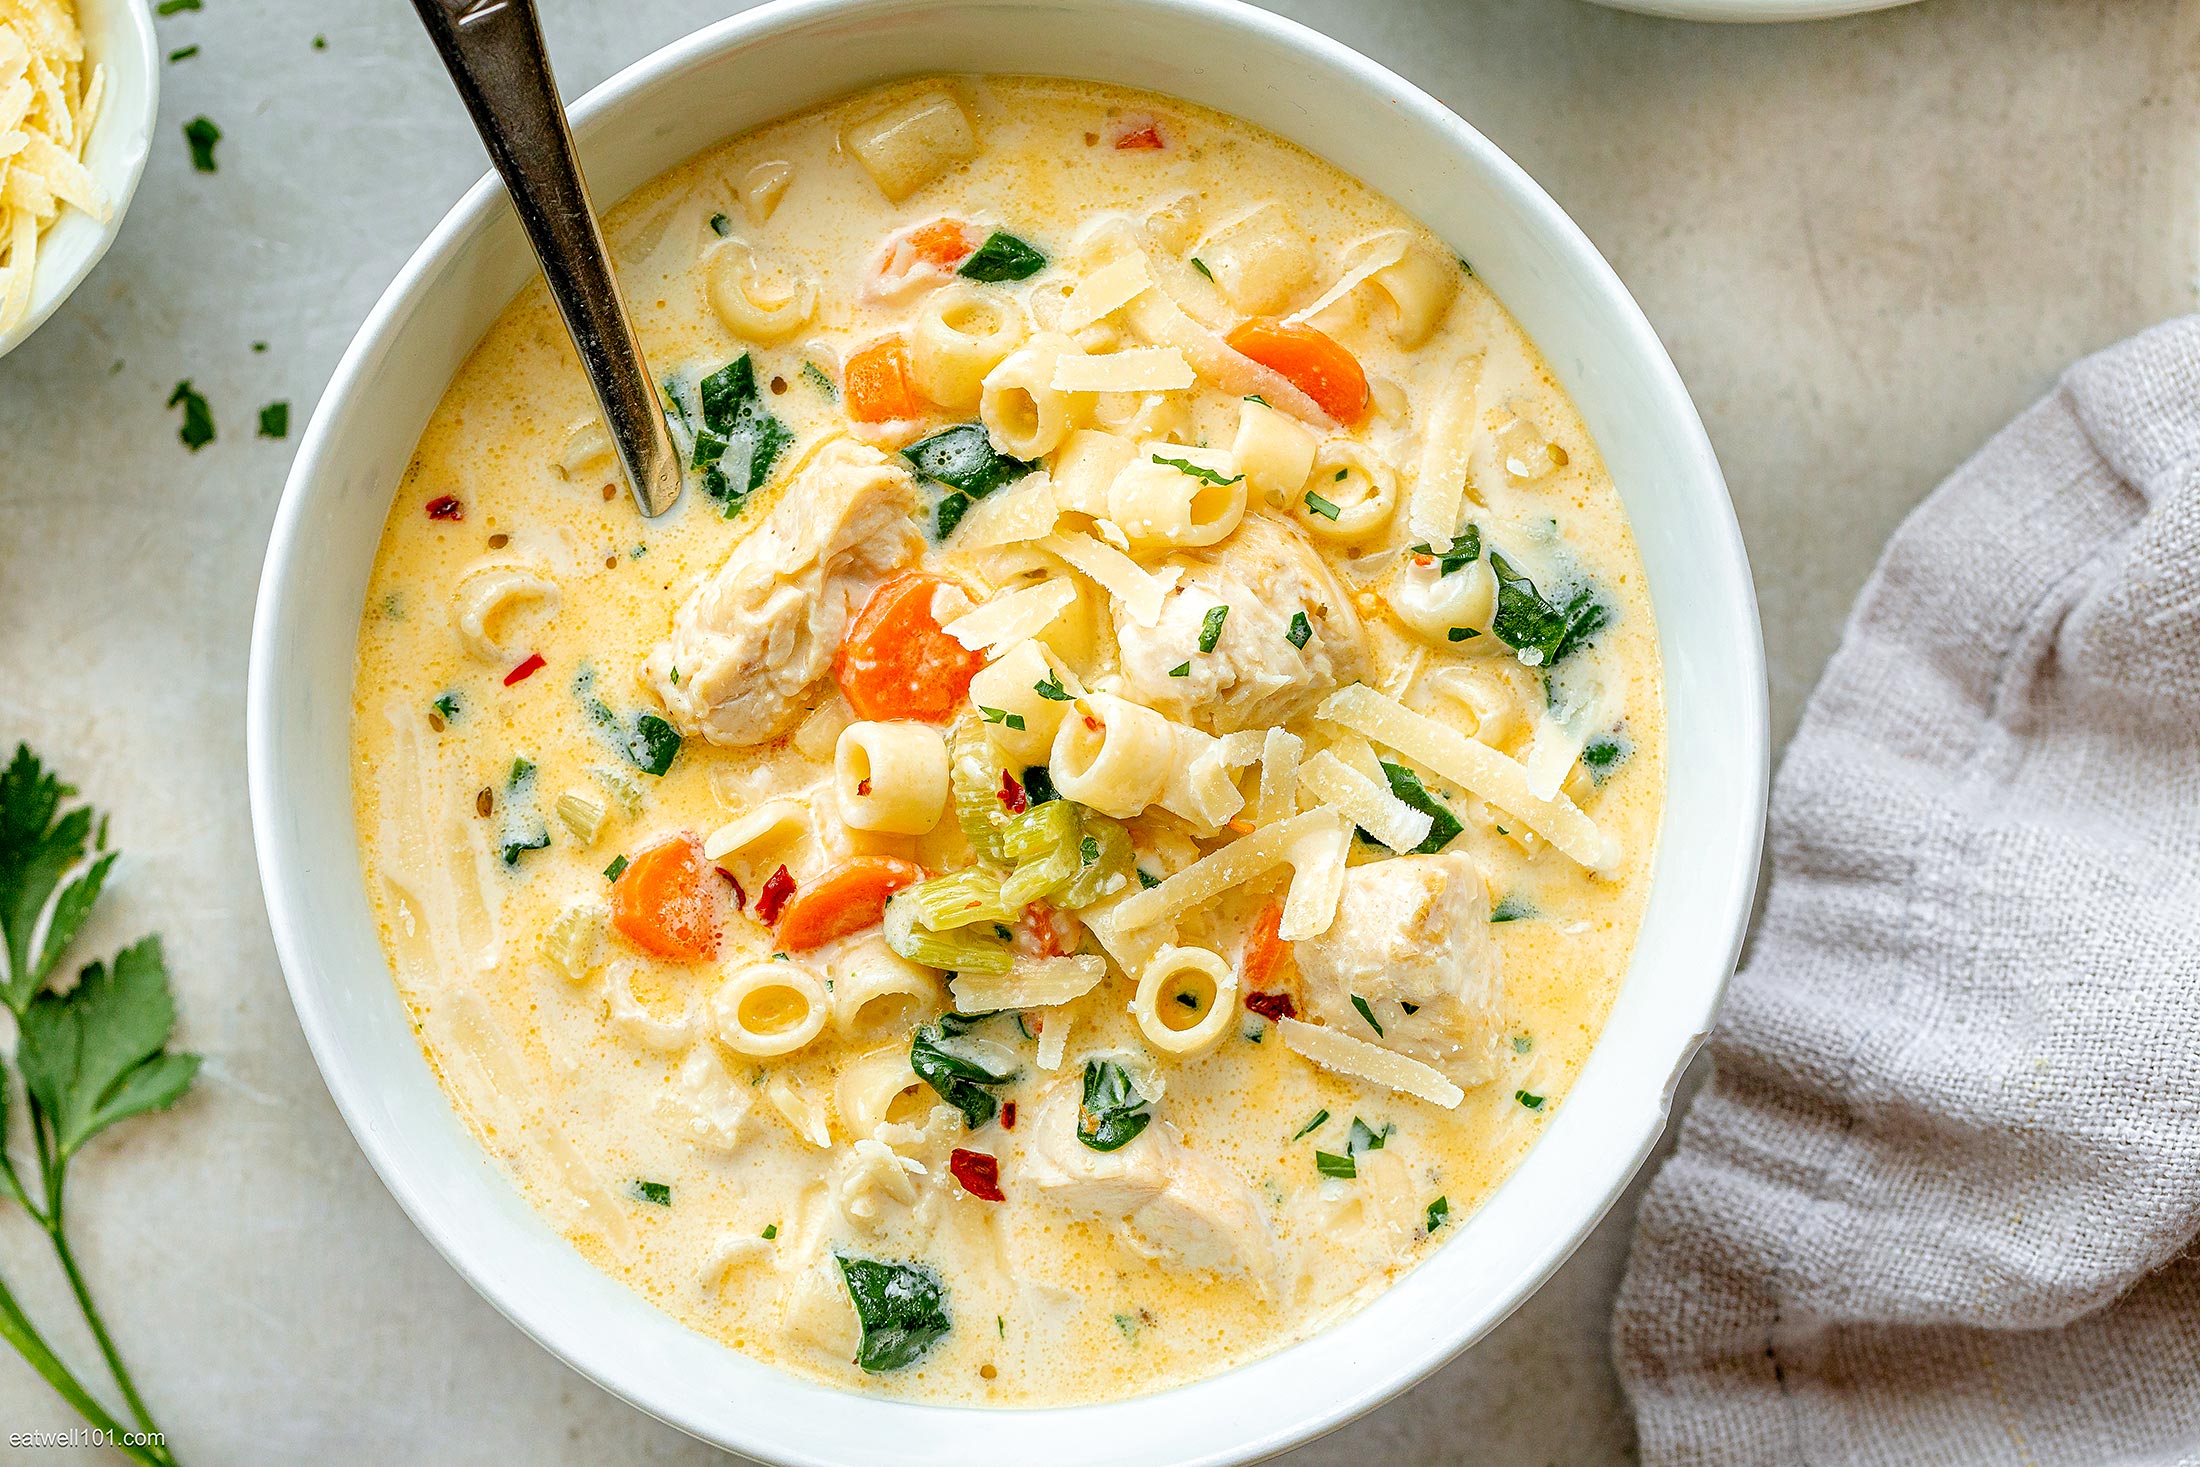 Creamy Chicken Pasta Soup Recipe With Carrot And Spinach Best Chicken Noodle Soup Recipe Eatwell101